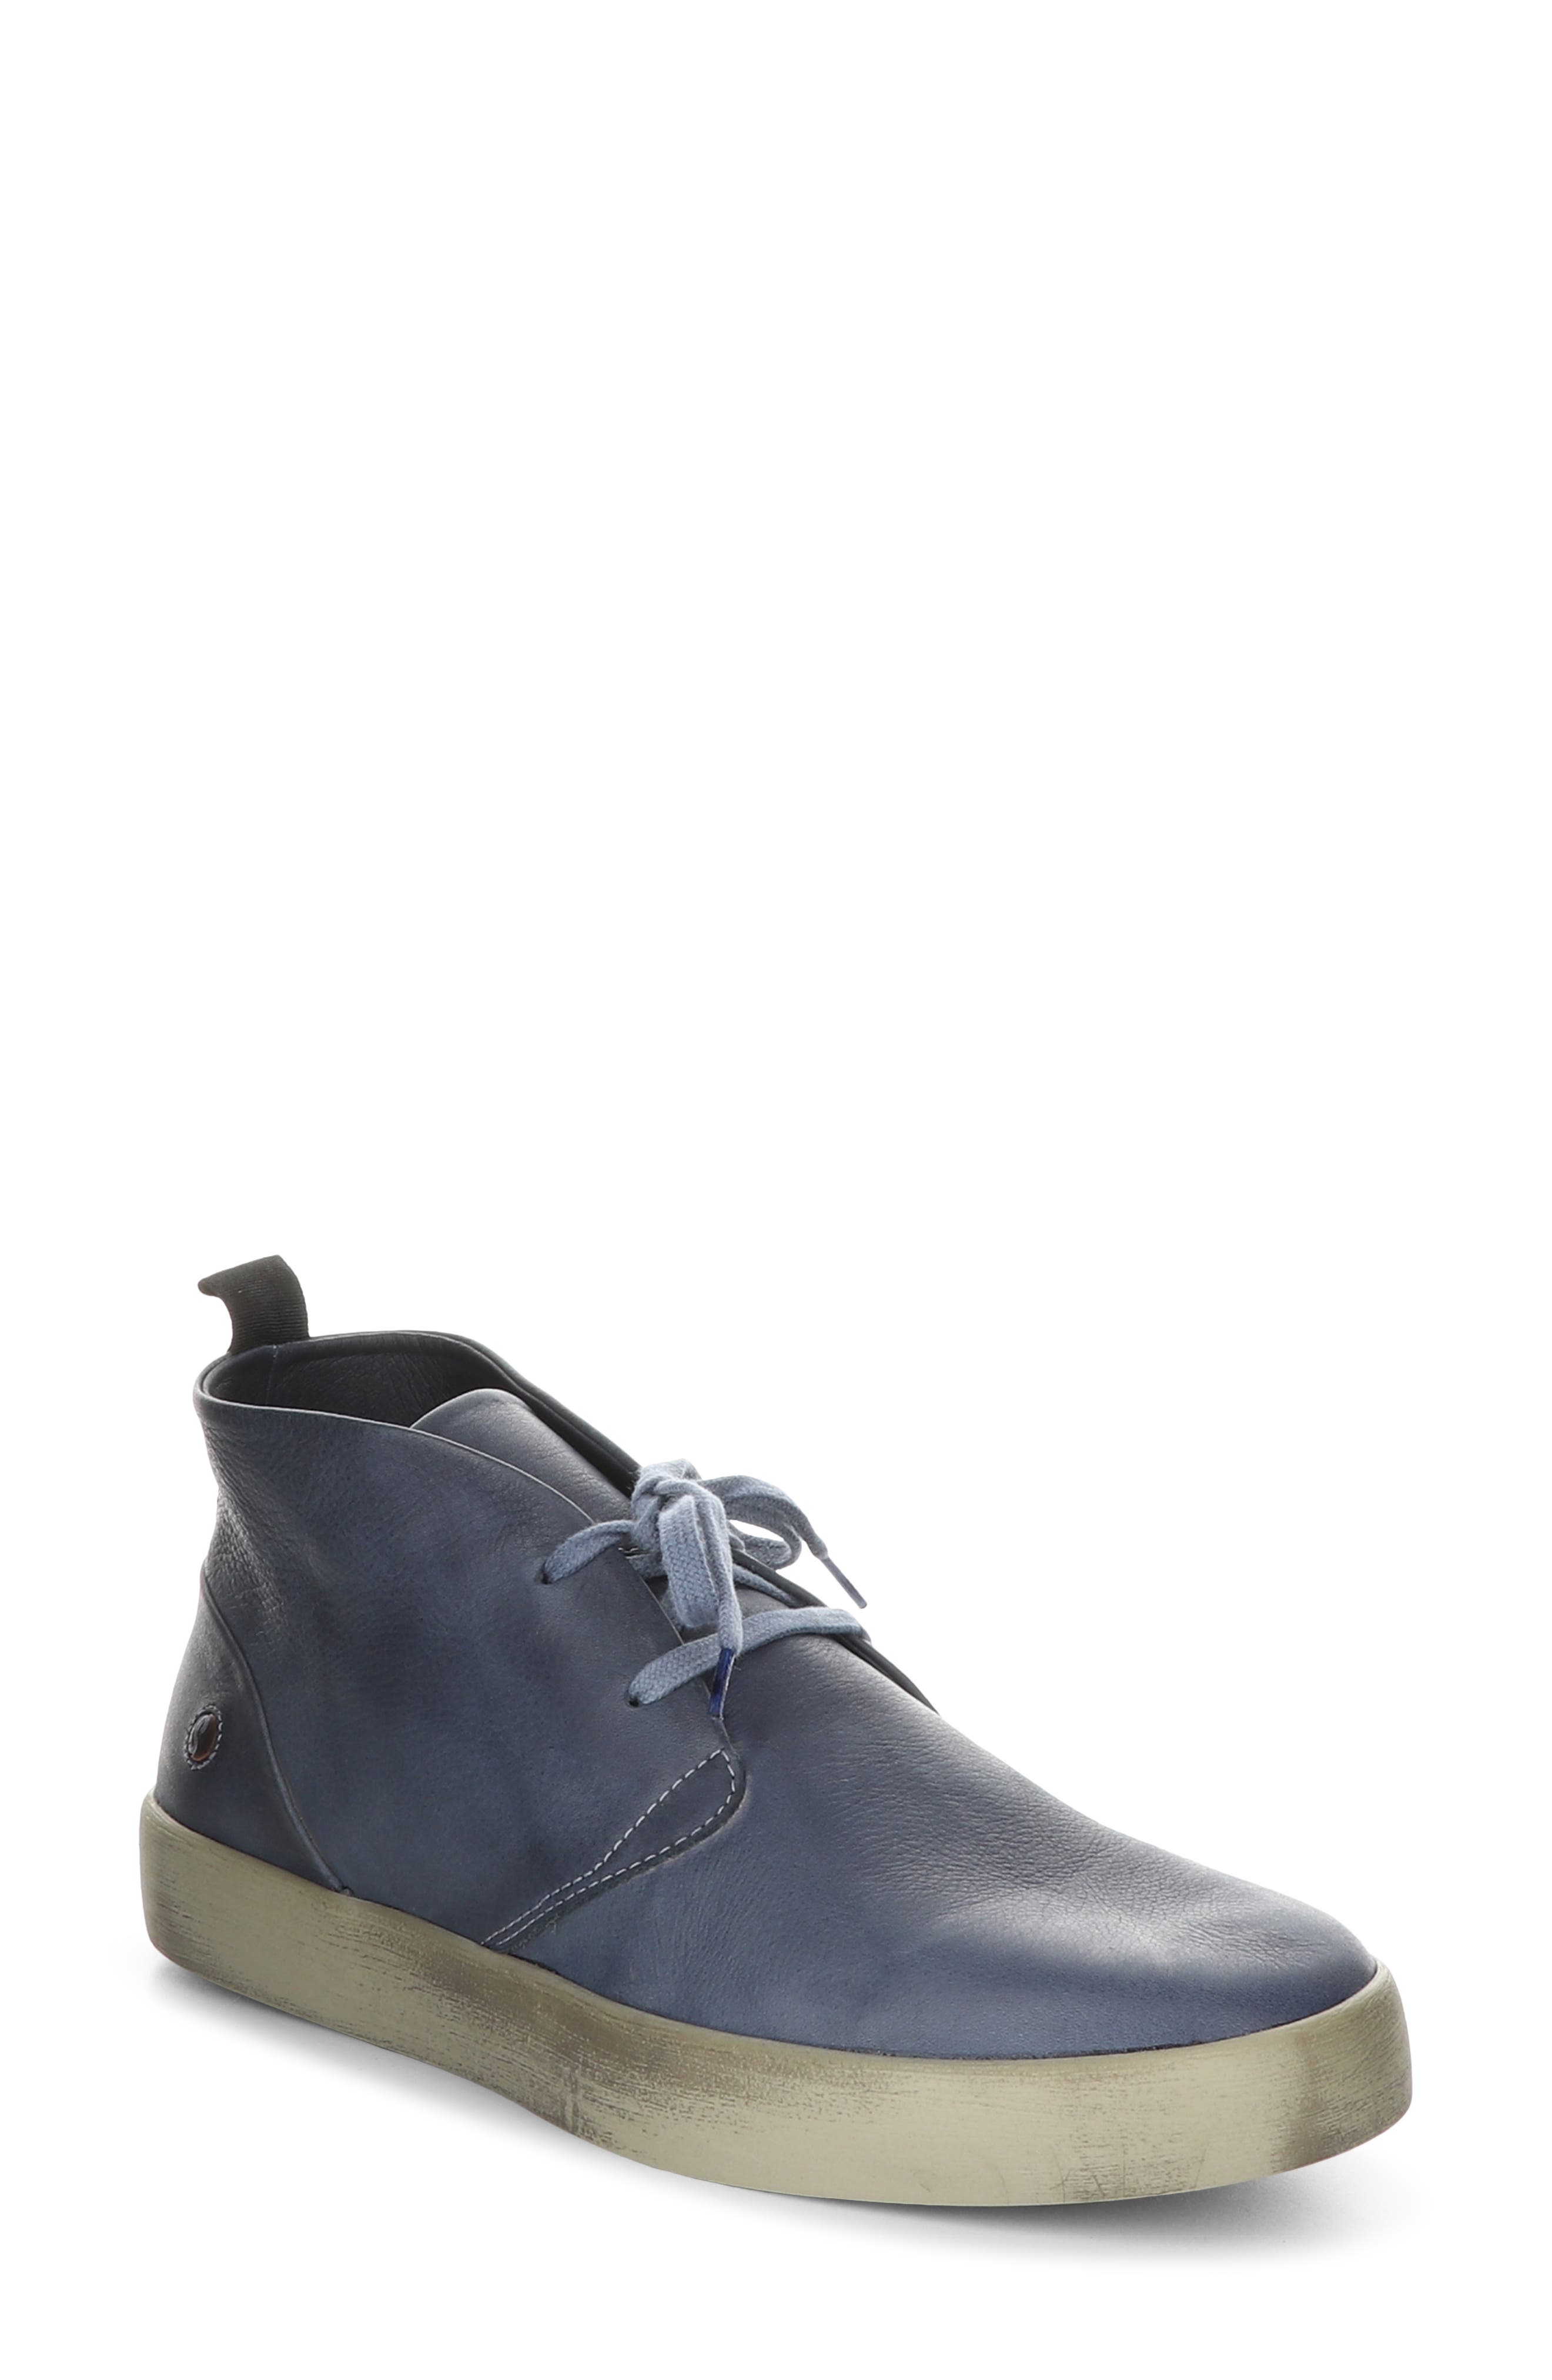 Mens Softinos by Fly London Boots 